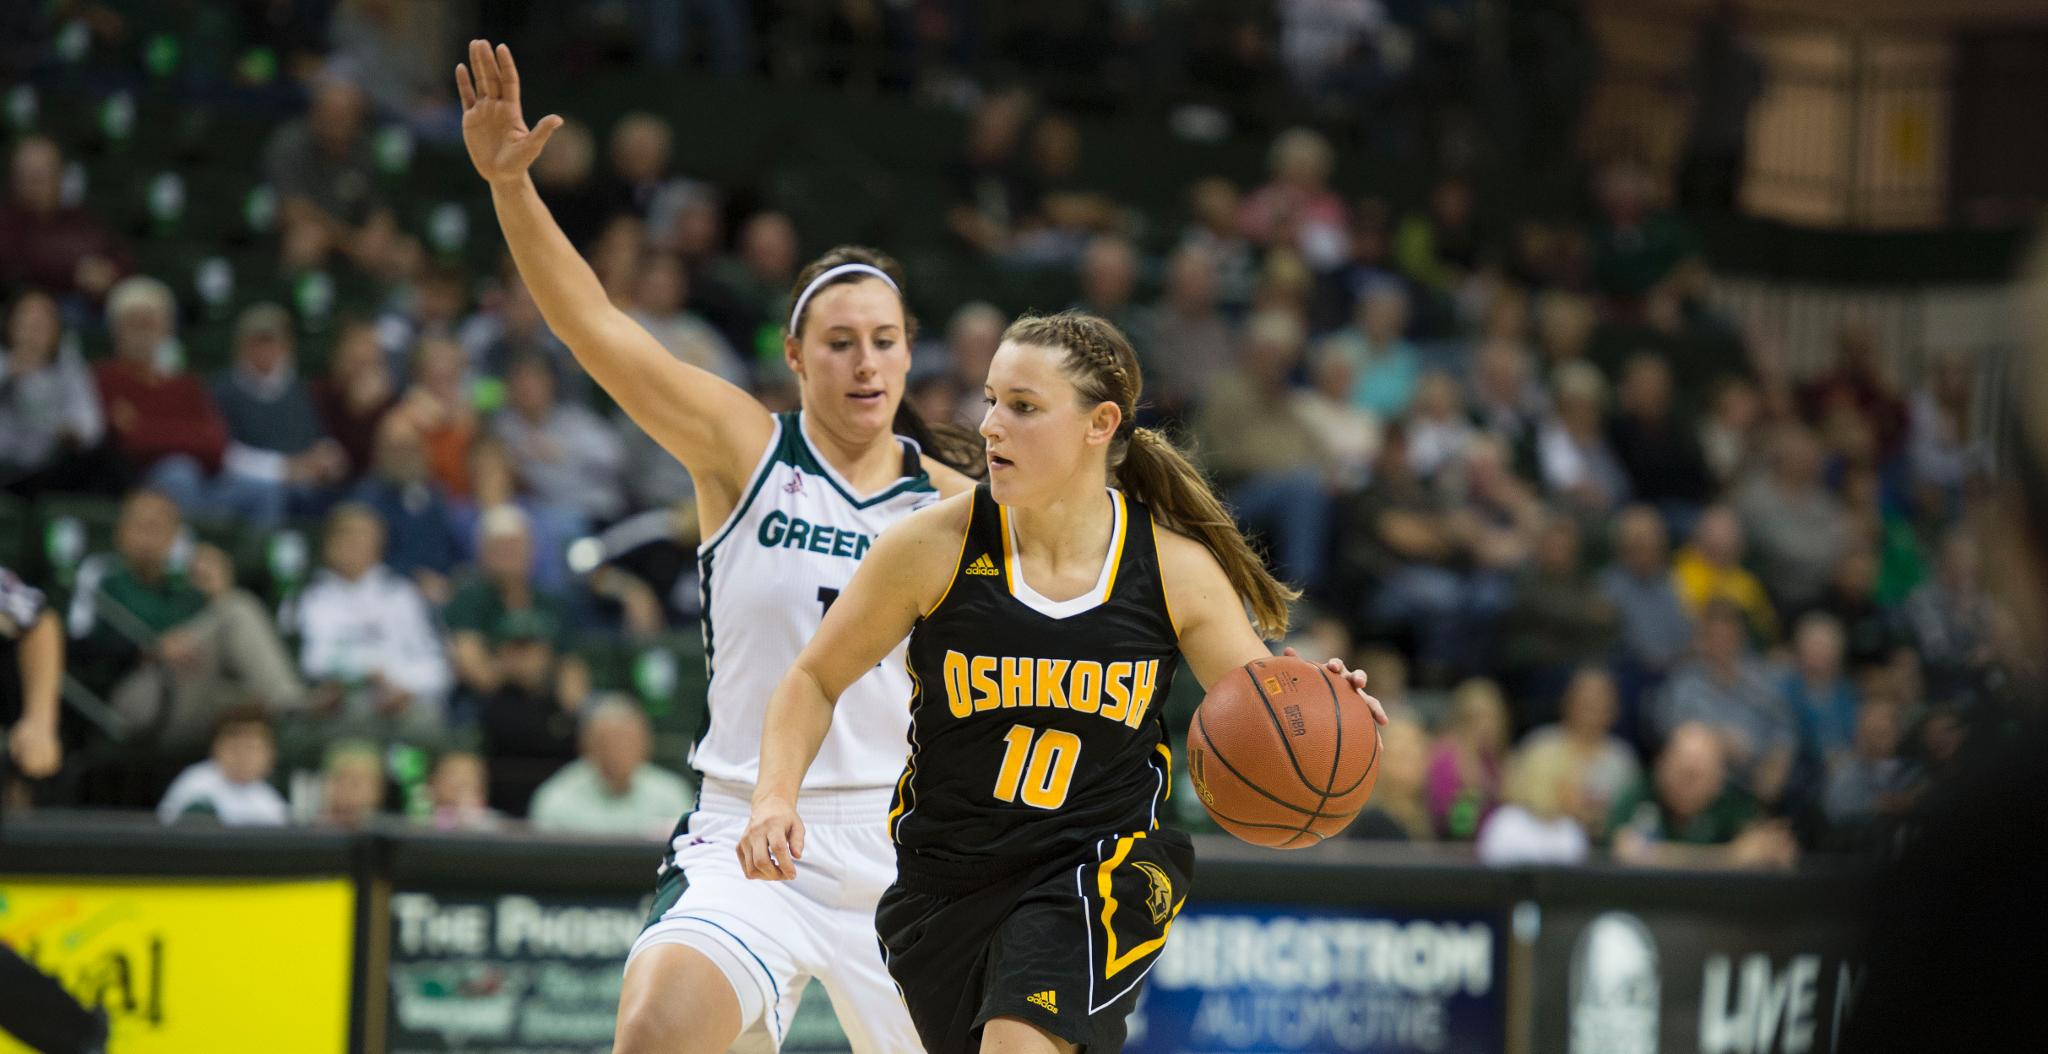 Taylor Schmidt had nine points and two rebounds against the Phoenix.